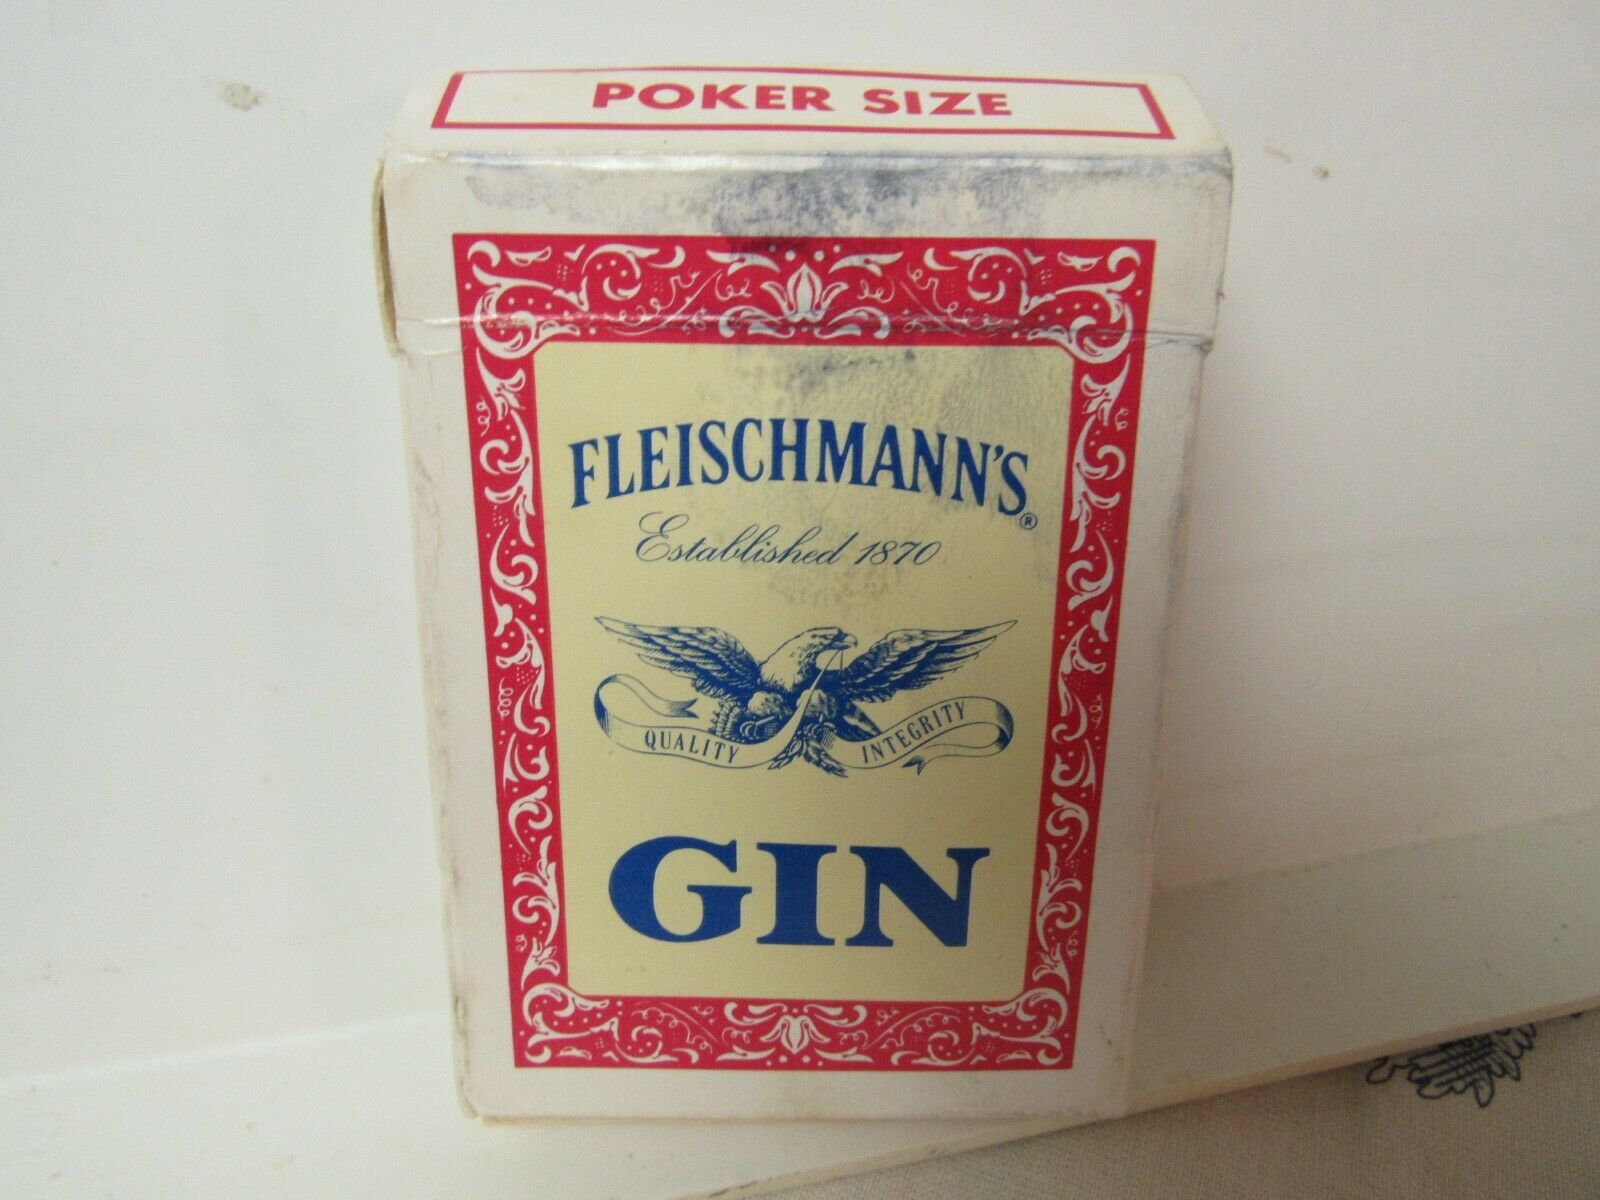 Vtg. Promotional Fleischmann's Gin / Hoyle Deck Of Playing Cards